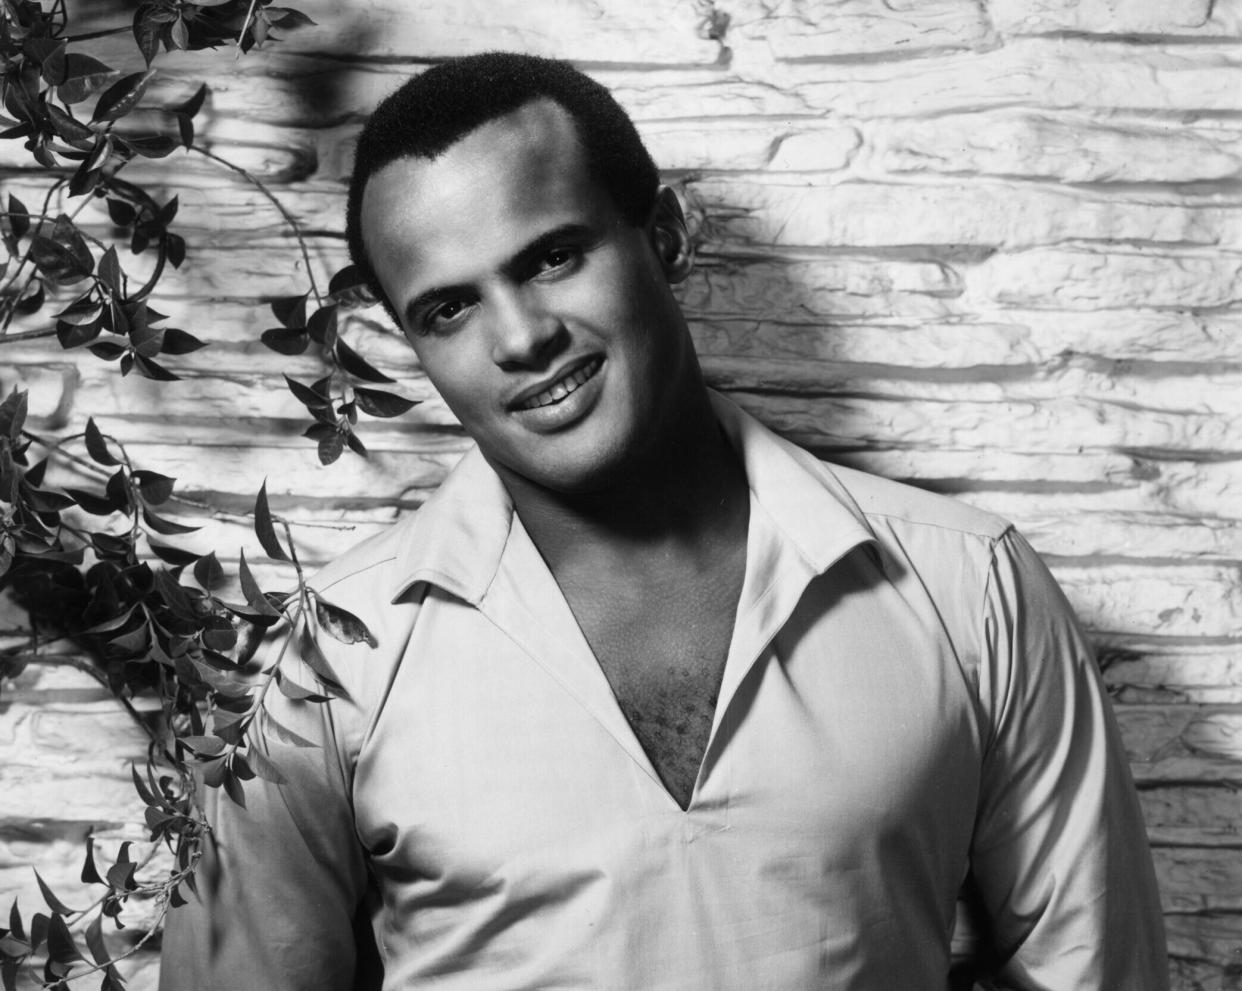 Harry Belafonte, Caribbean Music Legend and Civil Rights Pioneer, Dies at 96